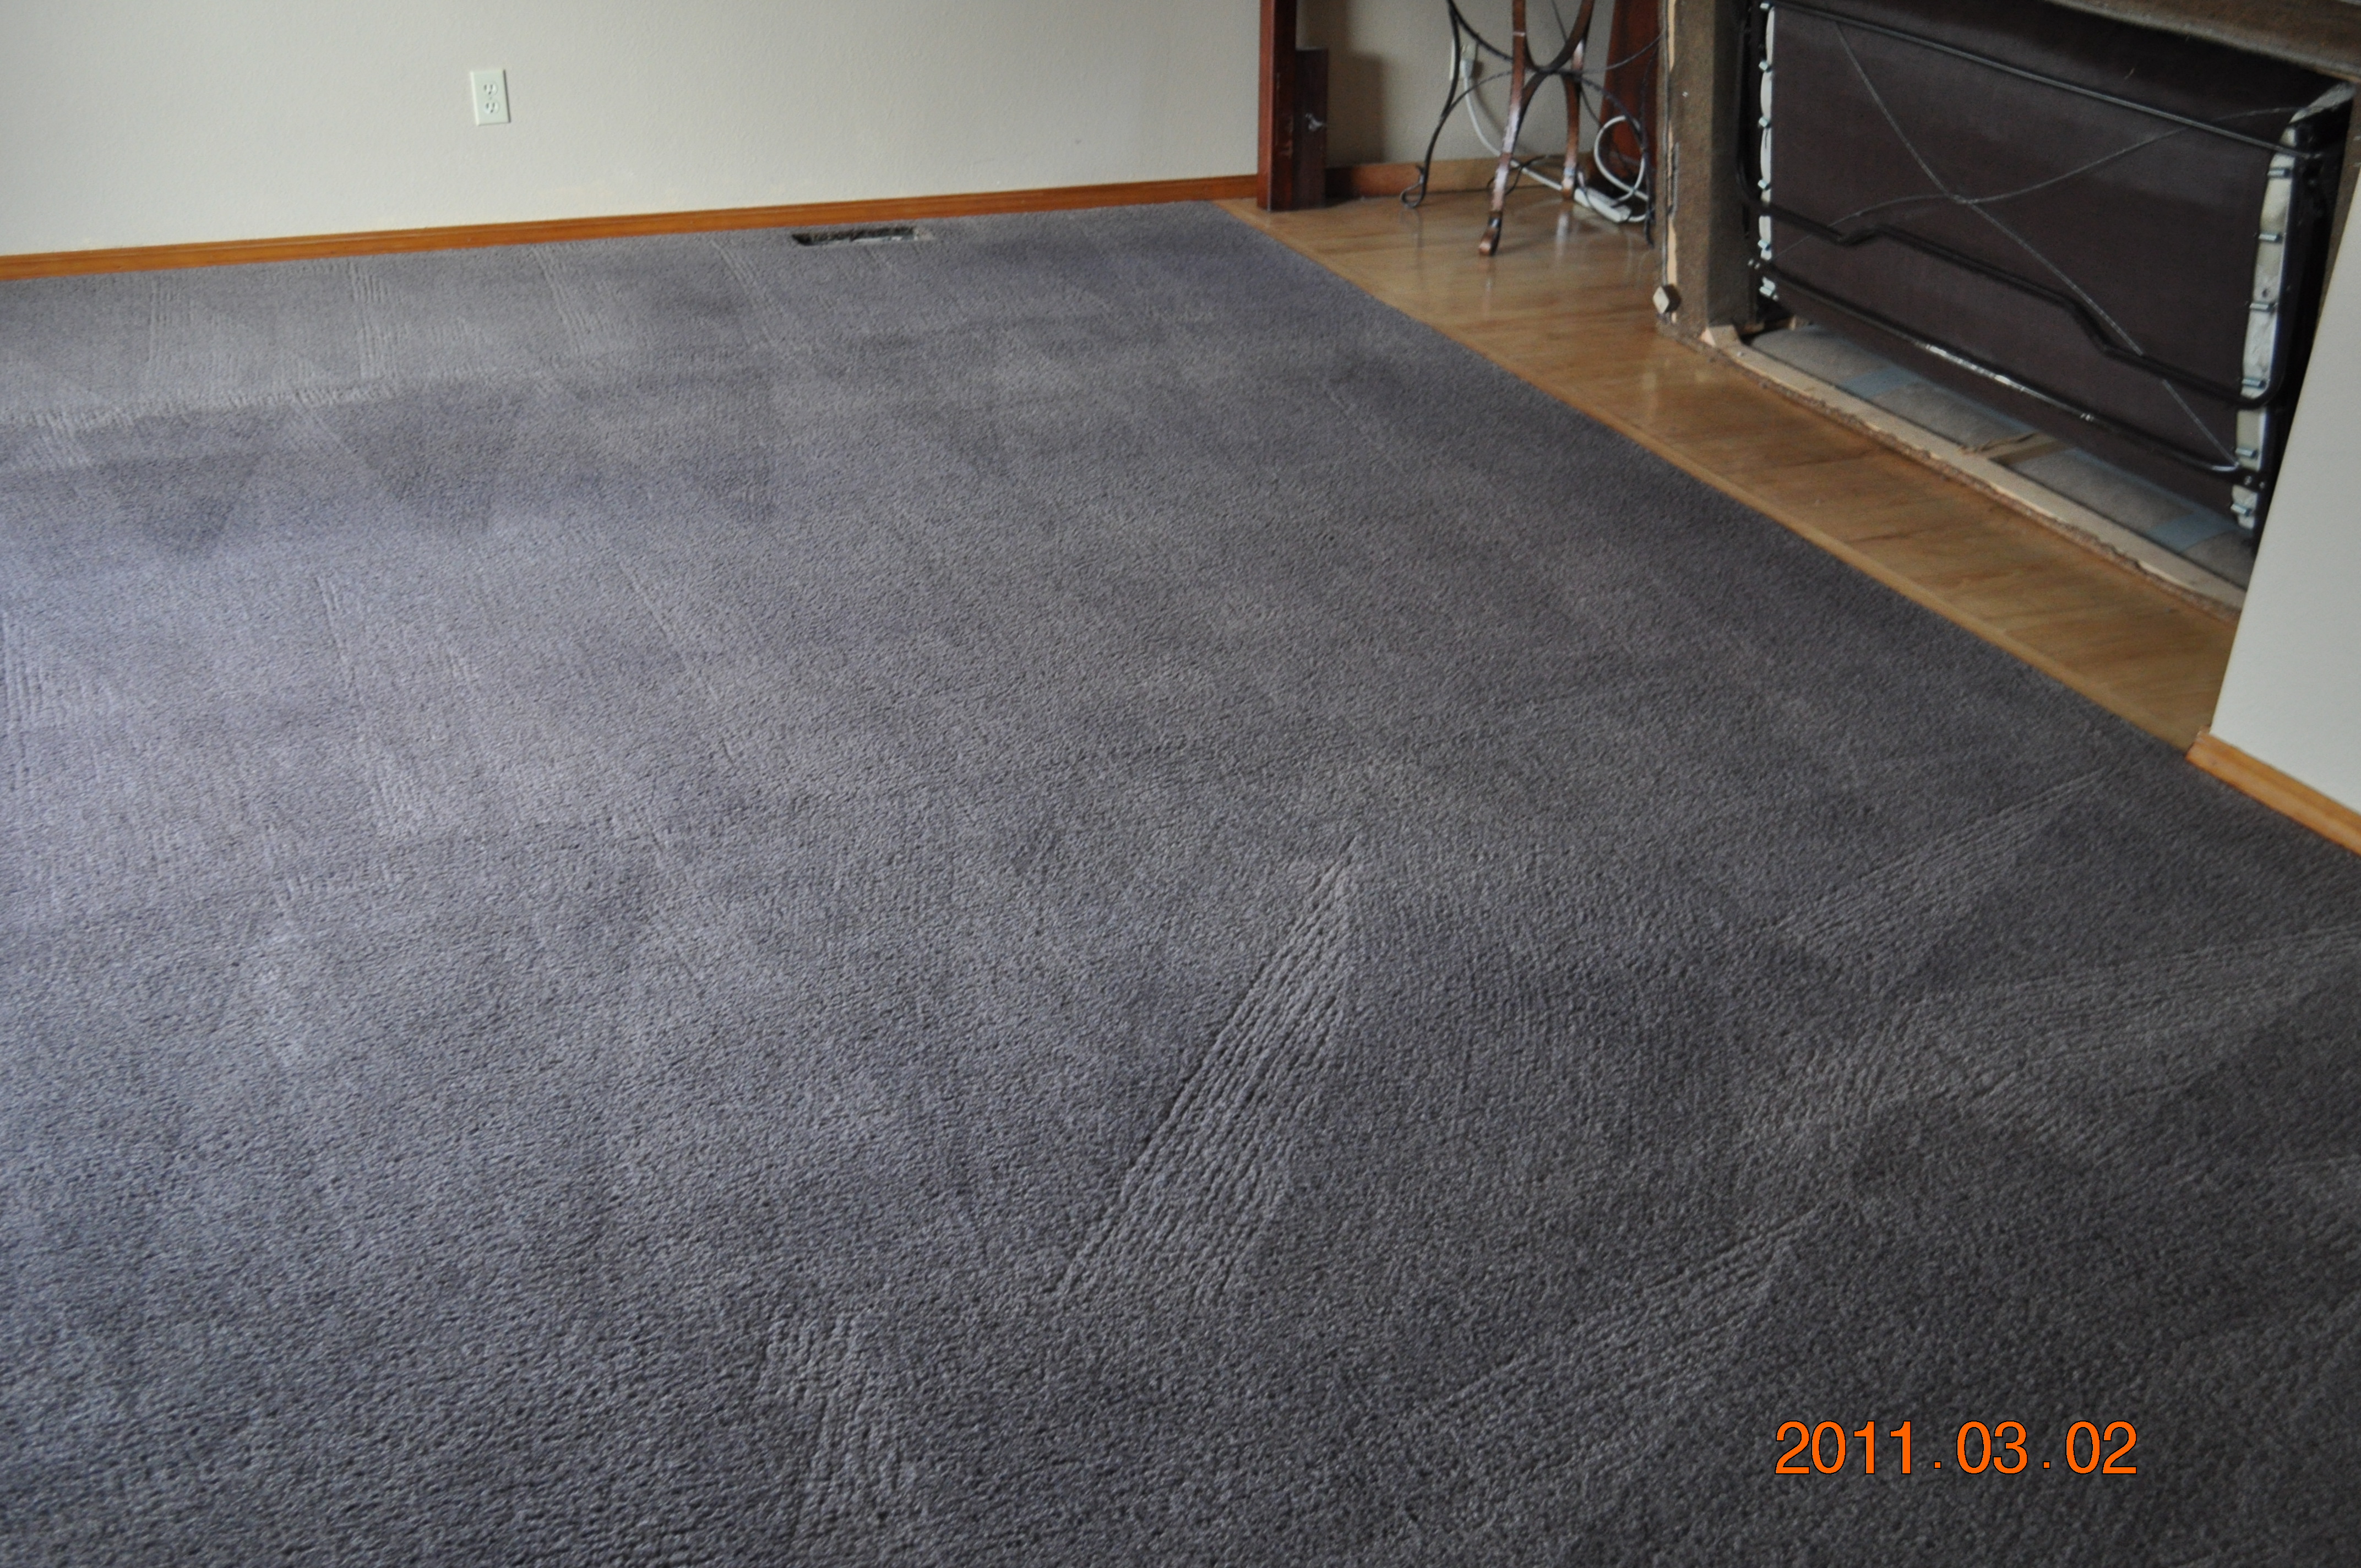 Guarantee System Carpet Cleaning Kennewick Richland Pasco WA Guarantee Carpet Cleaning & Dye Co.